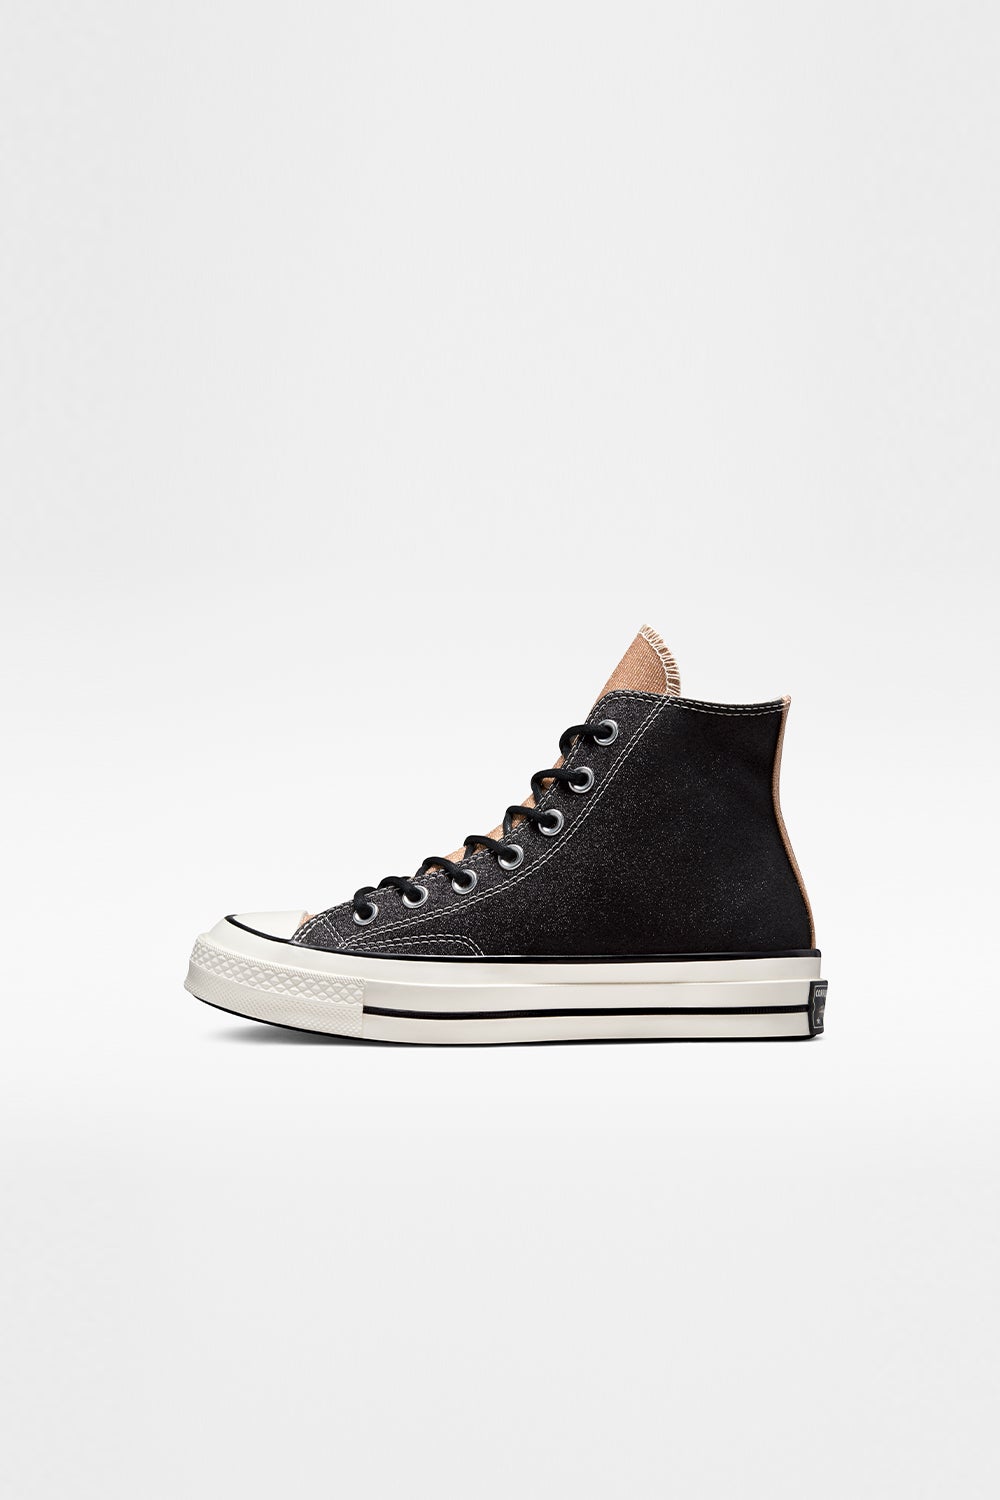 Converse Chuck 70 Authentic Glam High Top Black